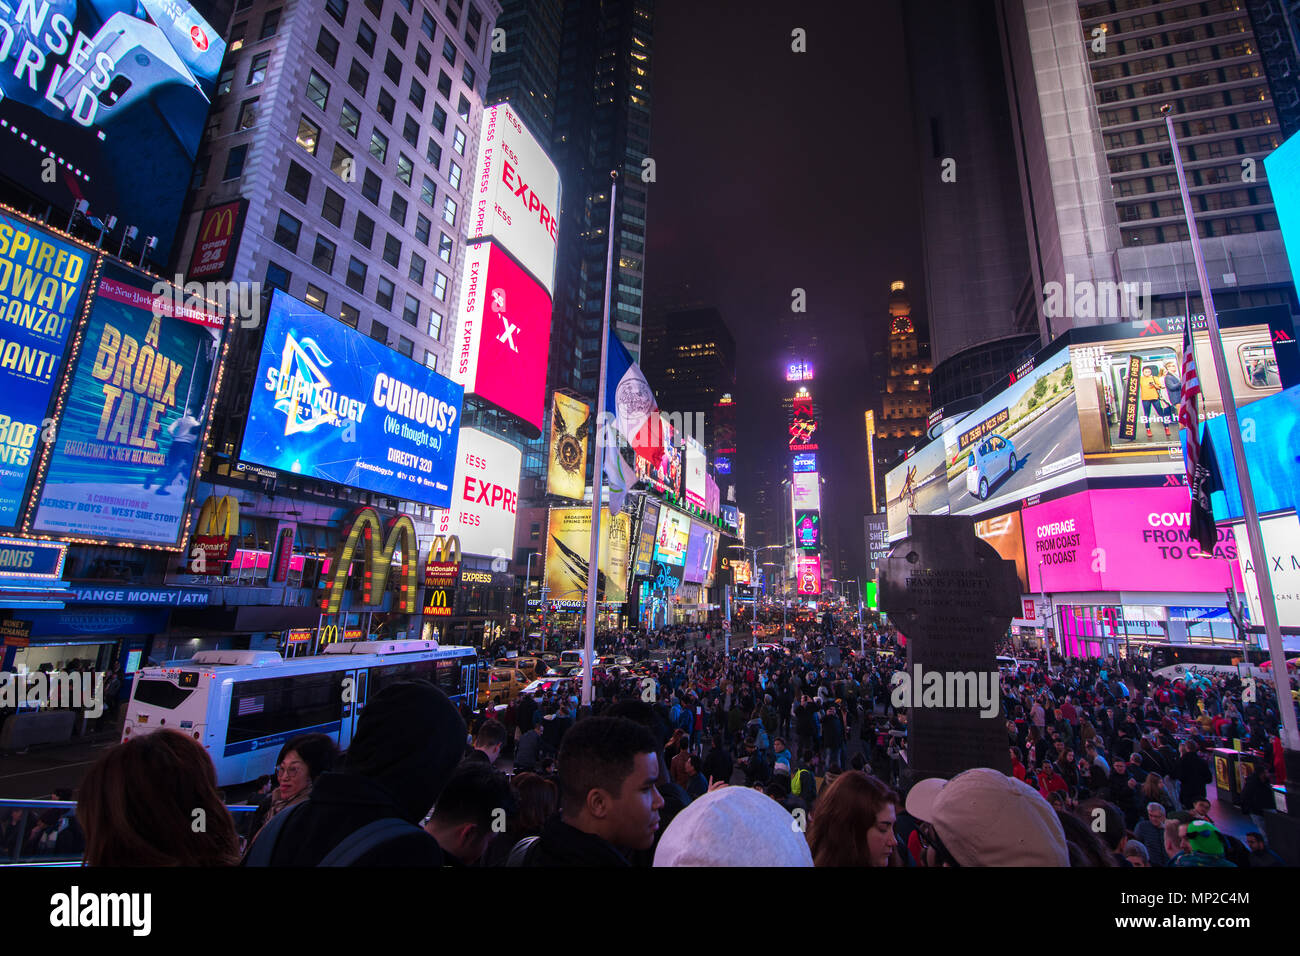 New York, US - March 30, 2018: View of people visiting the famous Times Square in New York on a foggy night Stock Photo